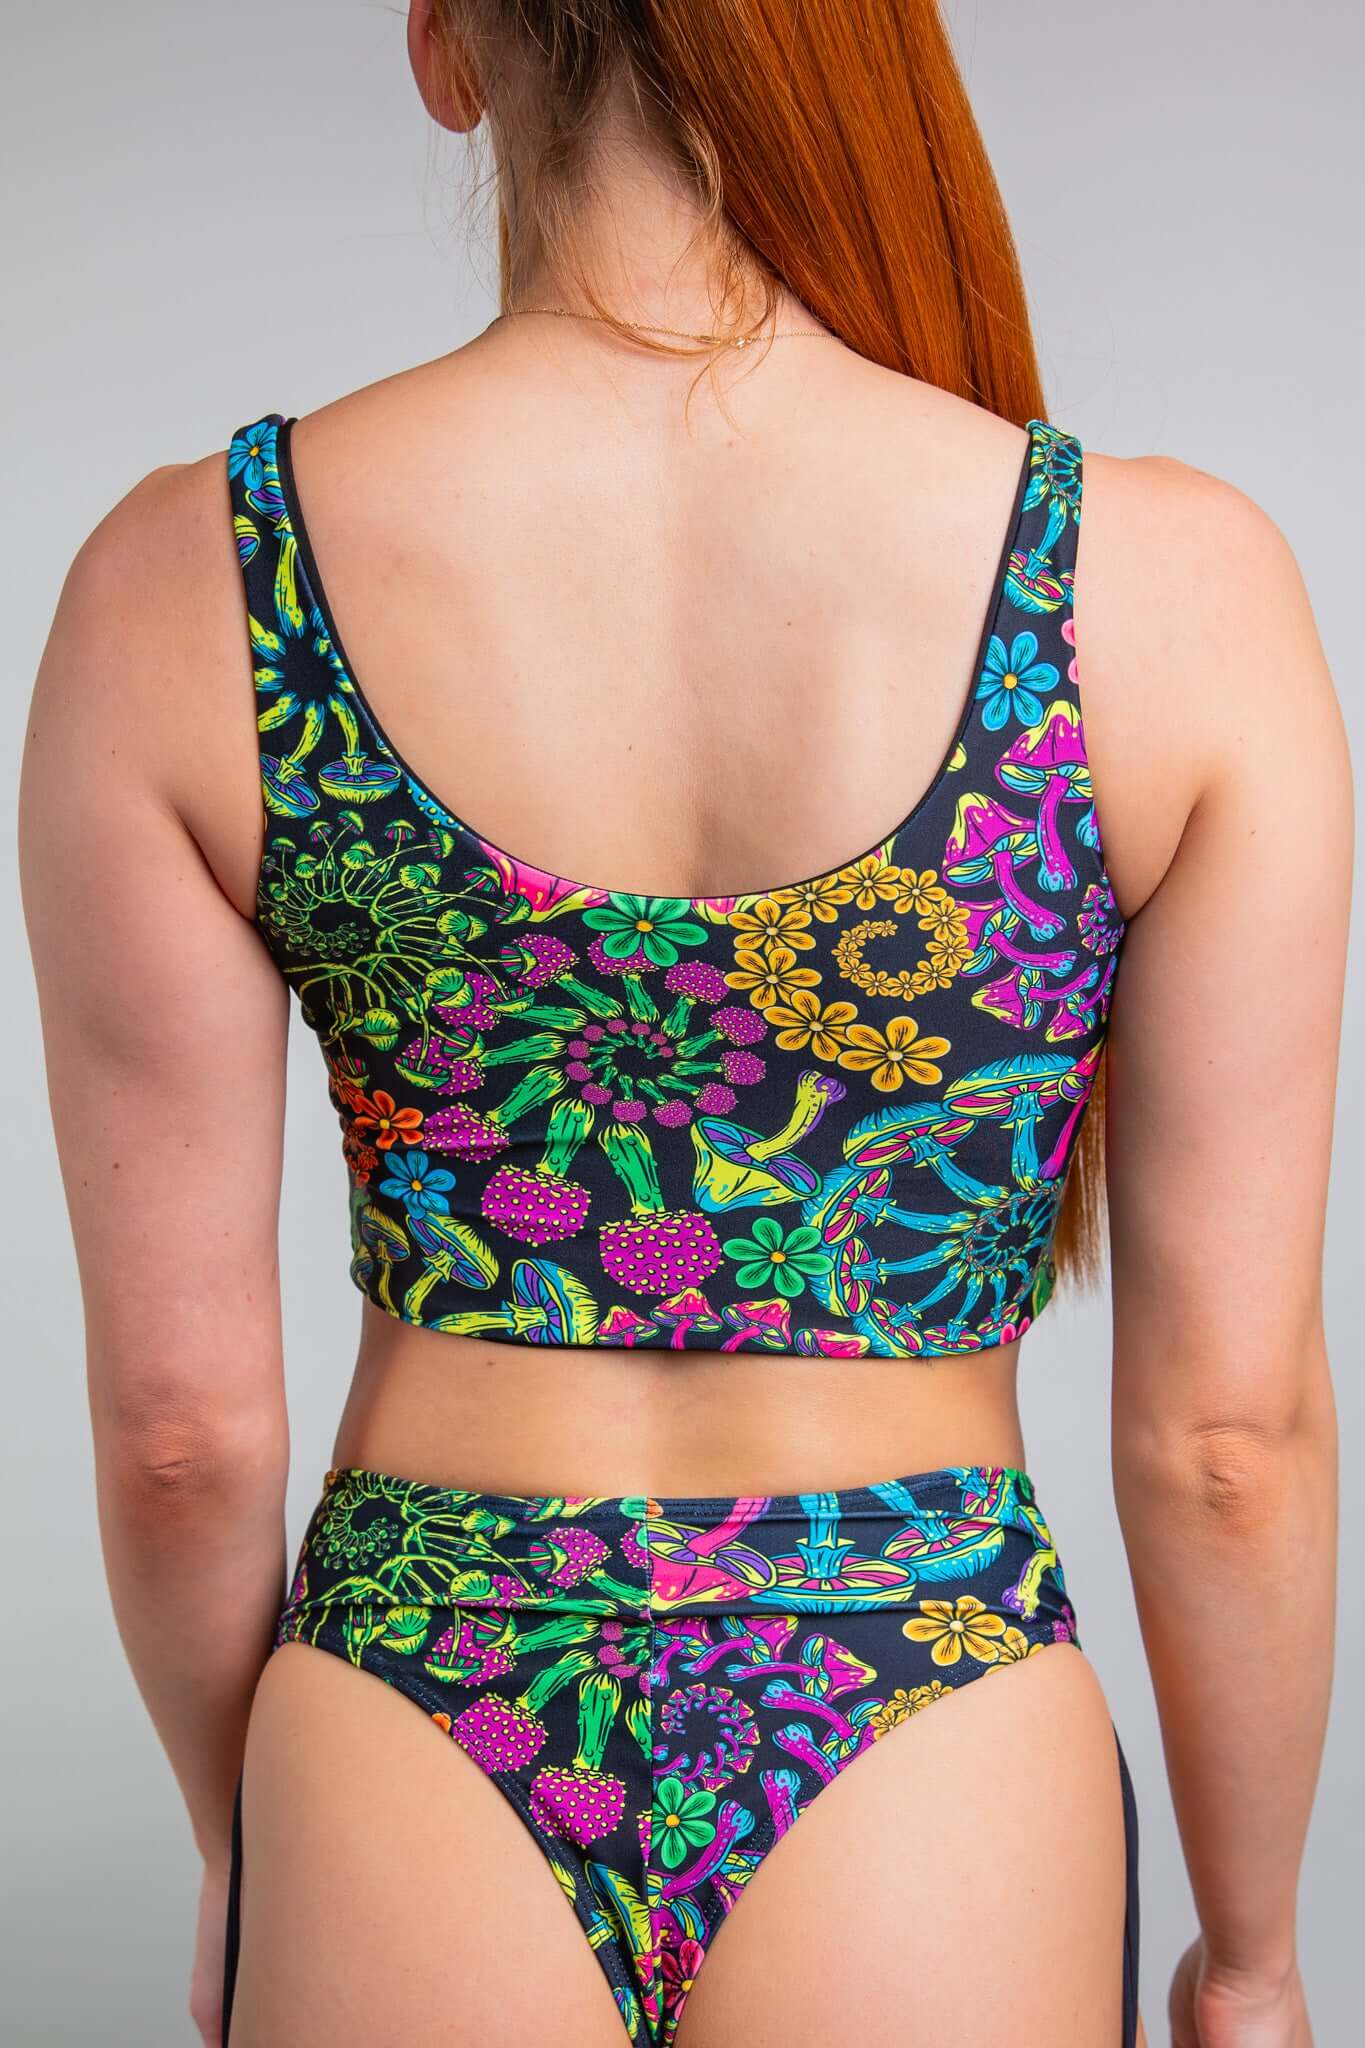 Rear view of a model in Freedom Rave Wear's floral tank top and matching high-waisted bikini bottoms, displaying an intricate, colorful pattern ideal for dynamic rave fashion